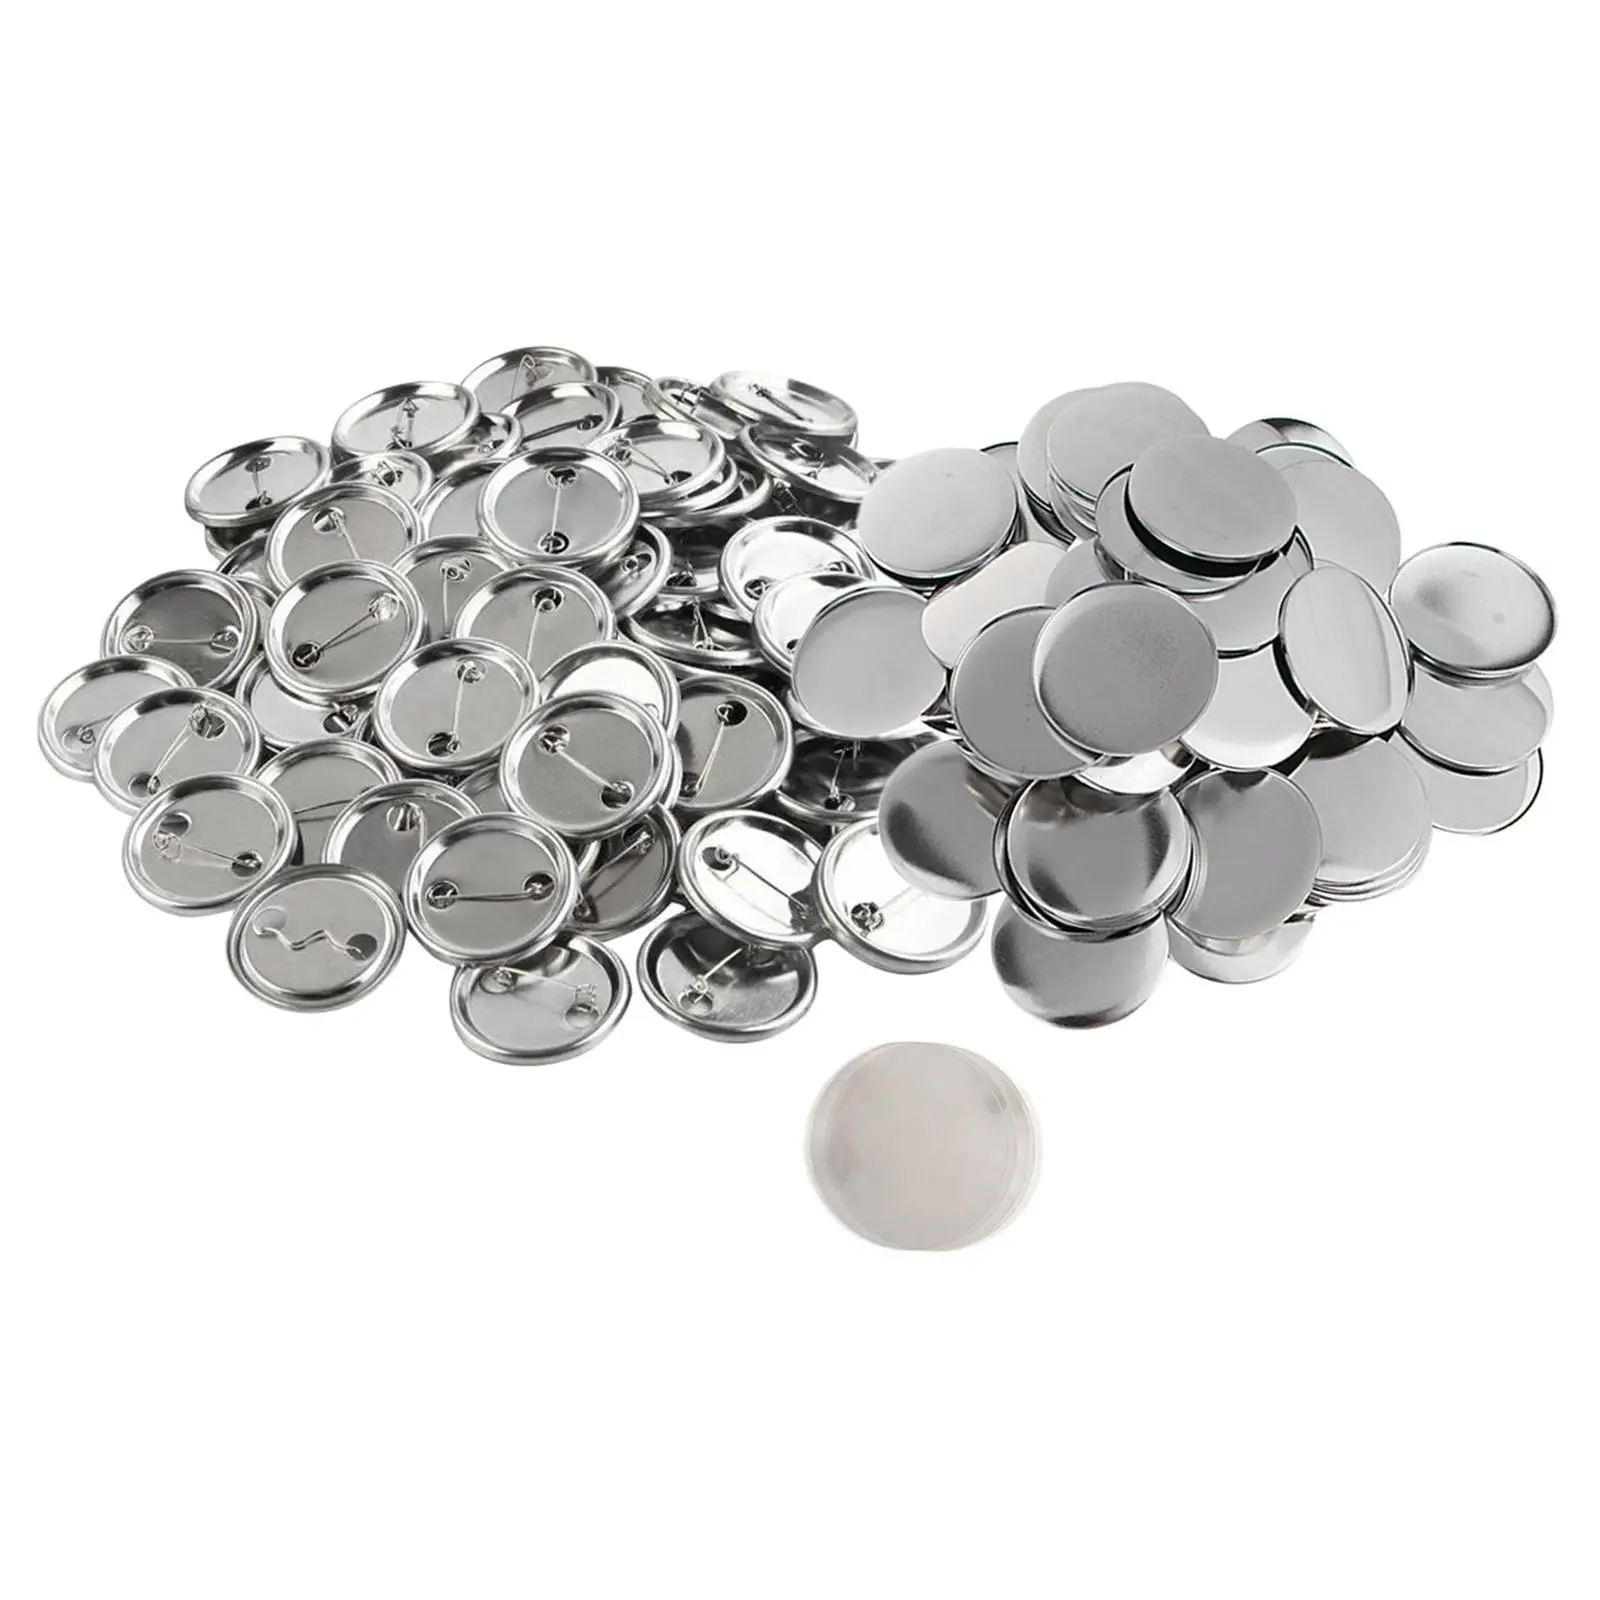 100 Pieces Blank Button Making Supplies Badge Making Materials Metal Button Pin Badge for Button Making Machine DIY Arts Crafts